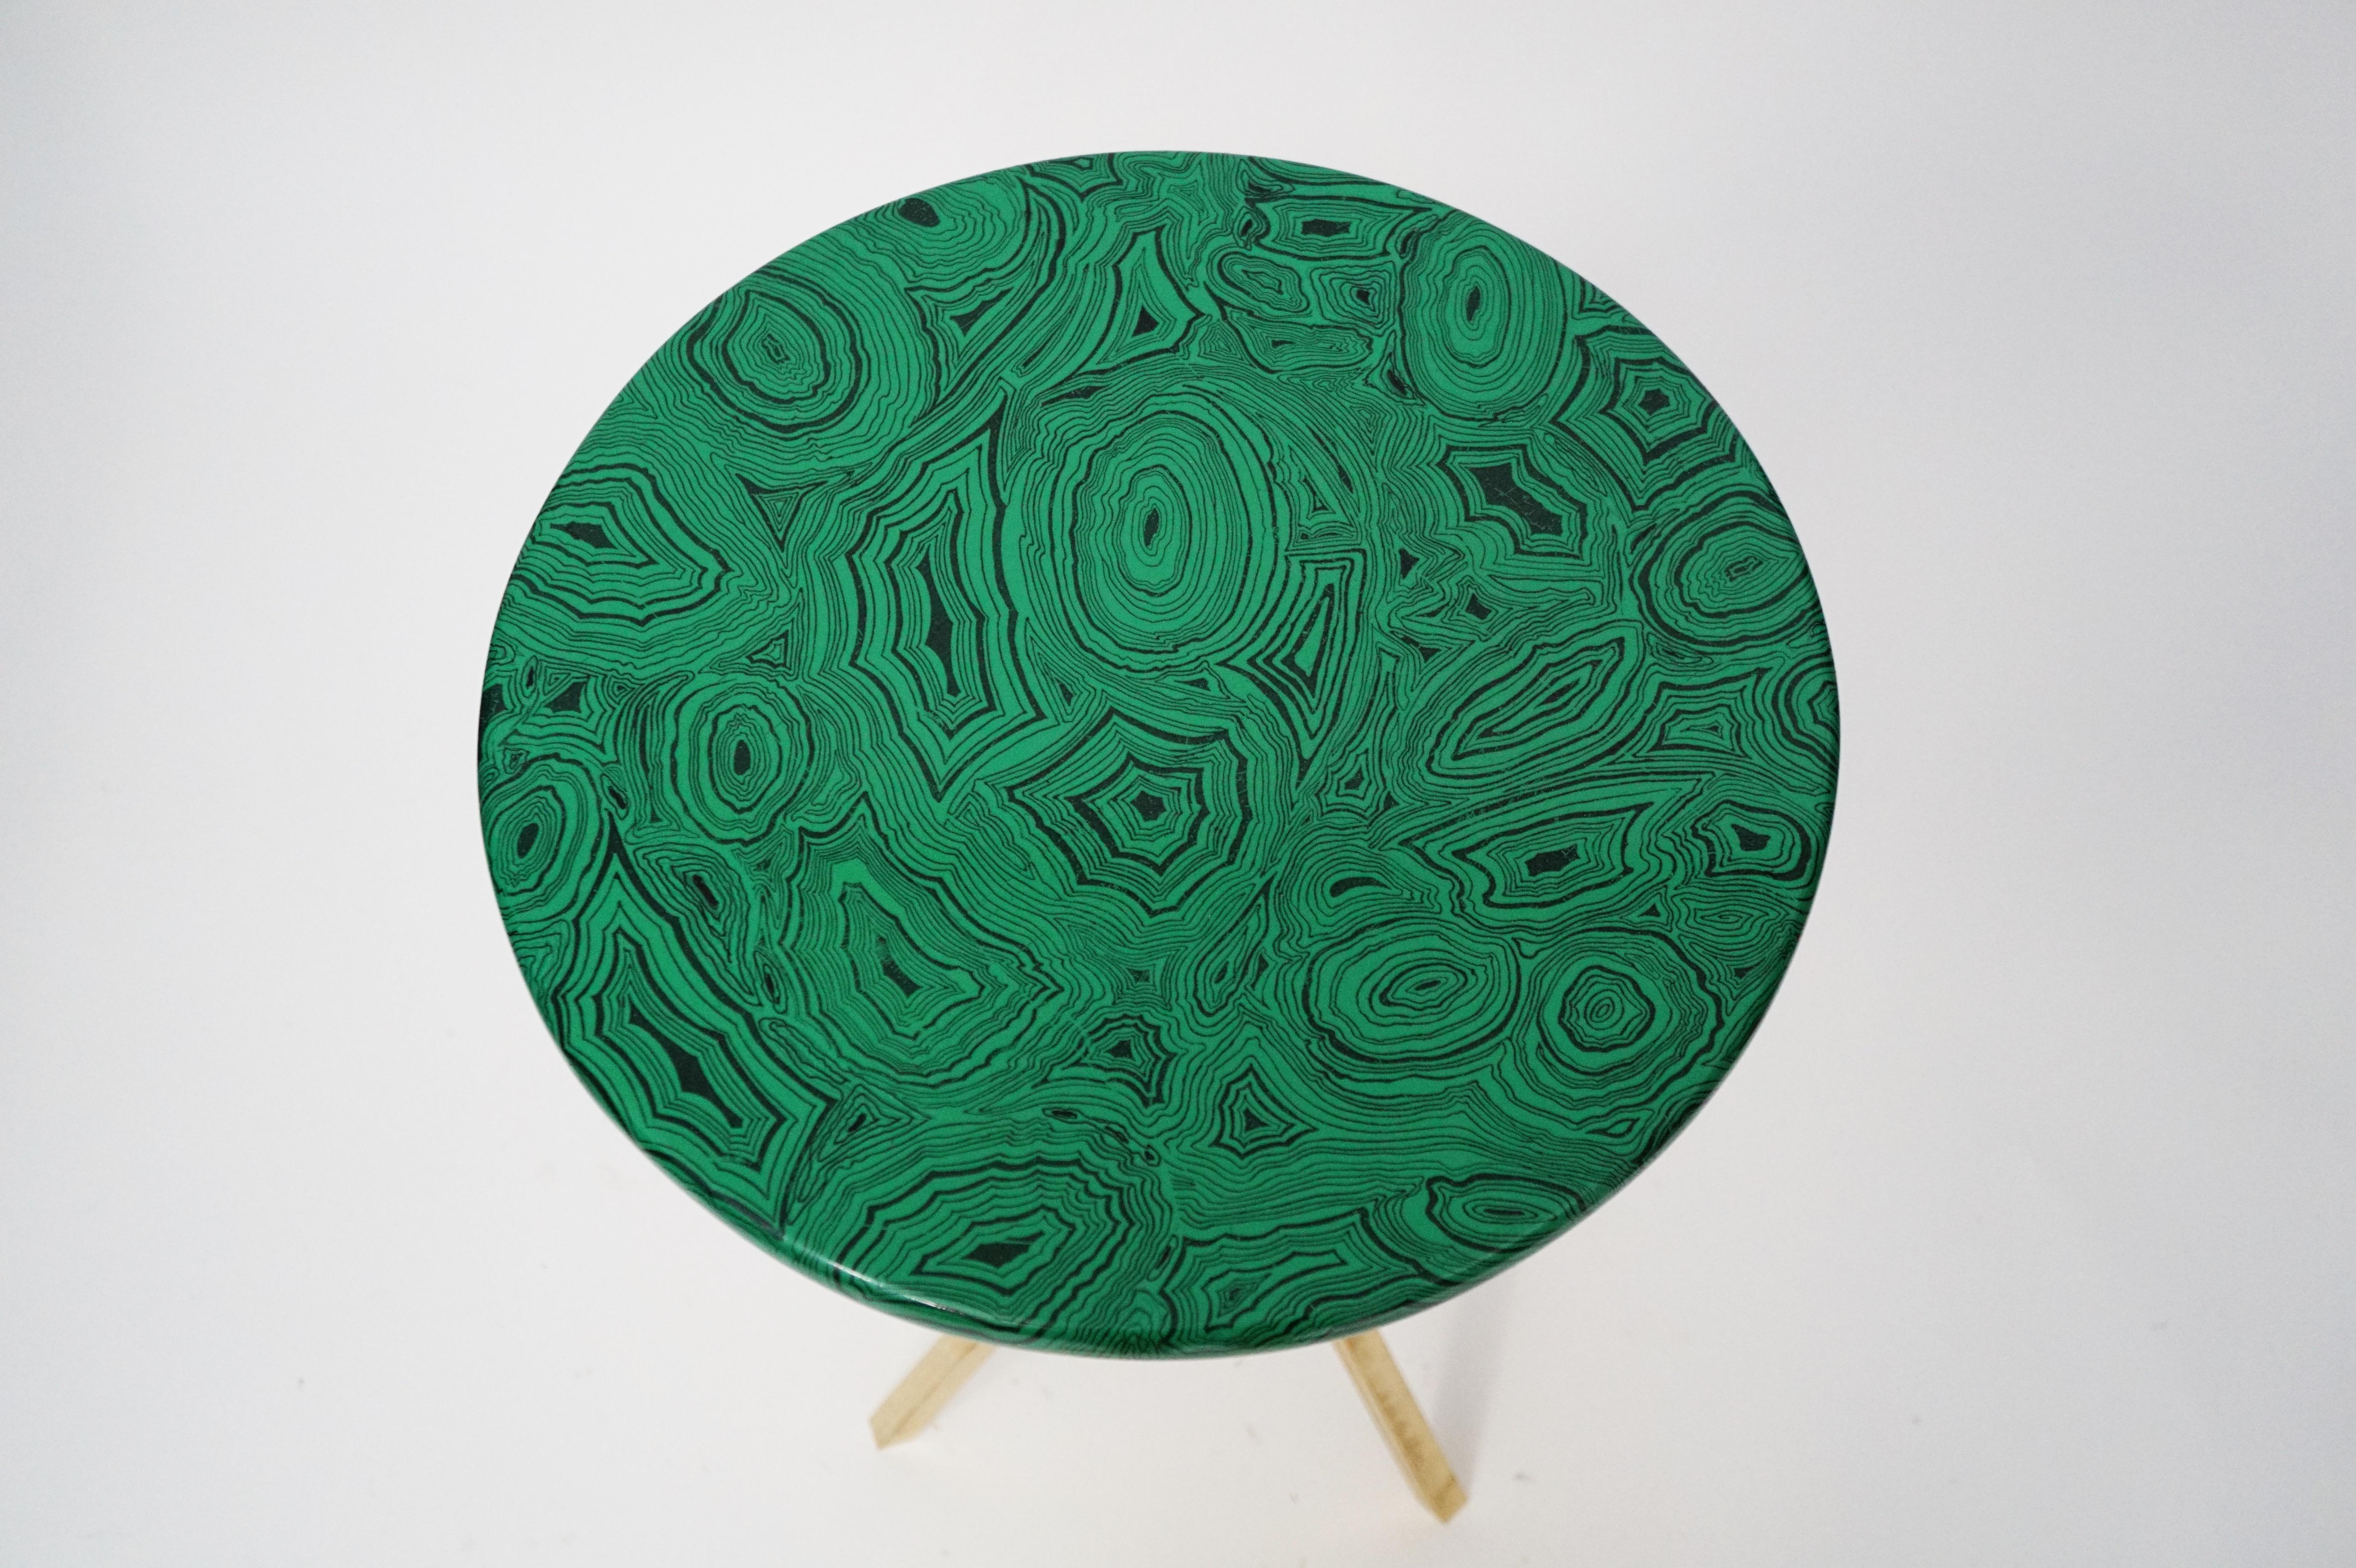 This gorgeous collectors item is a 'Malachite' side table by Piero Fornasetti, signed underneath with its original label. The side table is made with lacquered wood that has a malachite motif and is affixed on top of a brass tri-pod base that is